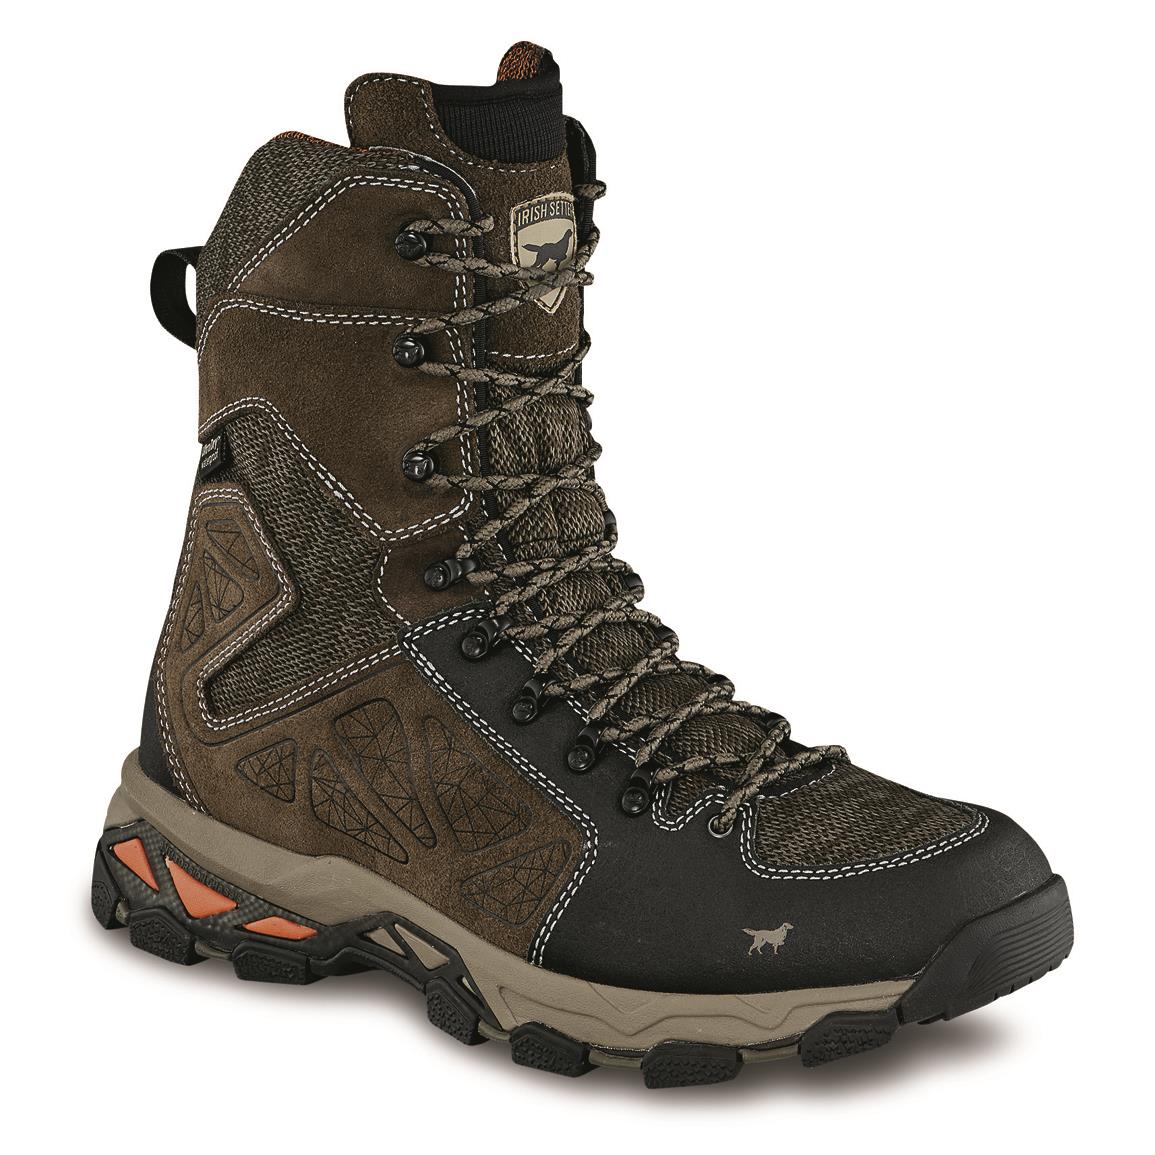 Buy > leather hunting boots > in stock